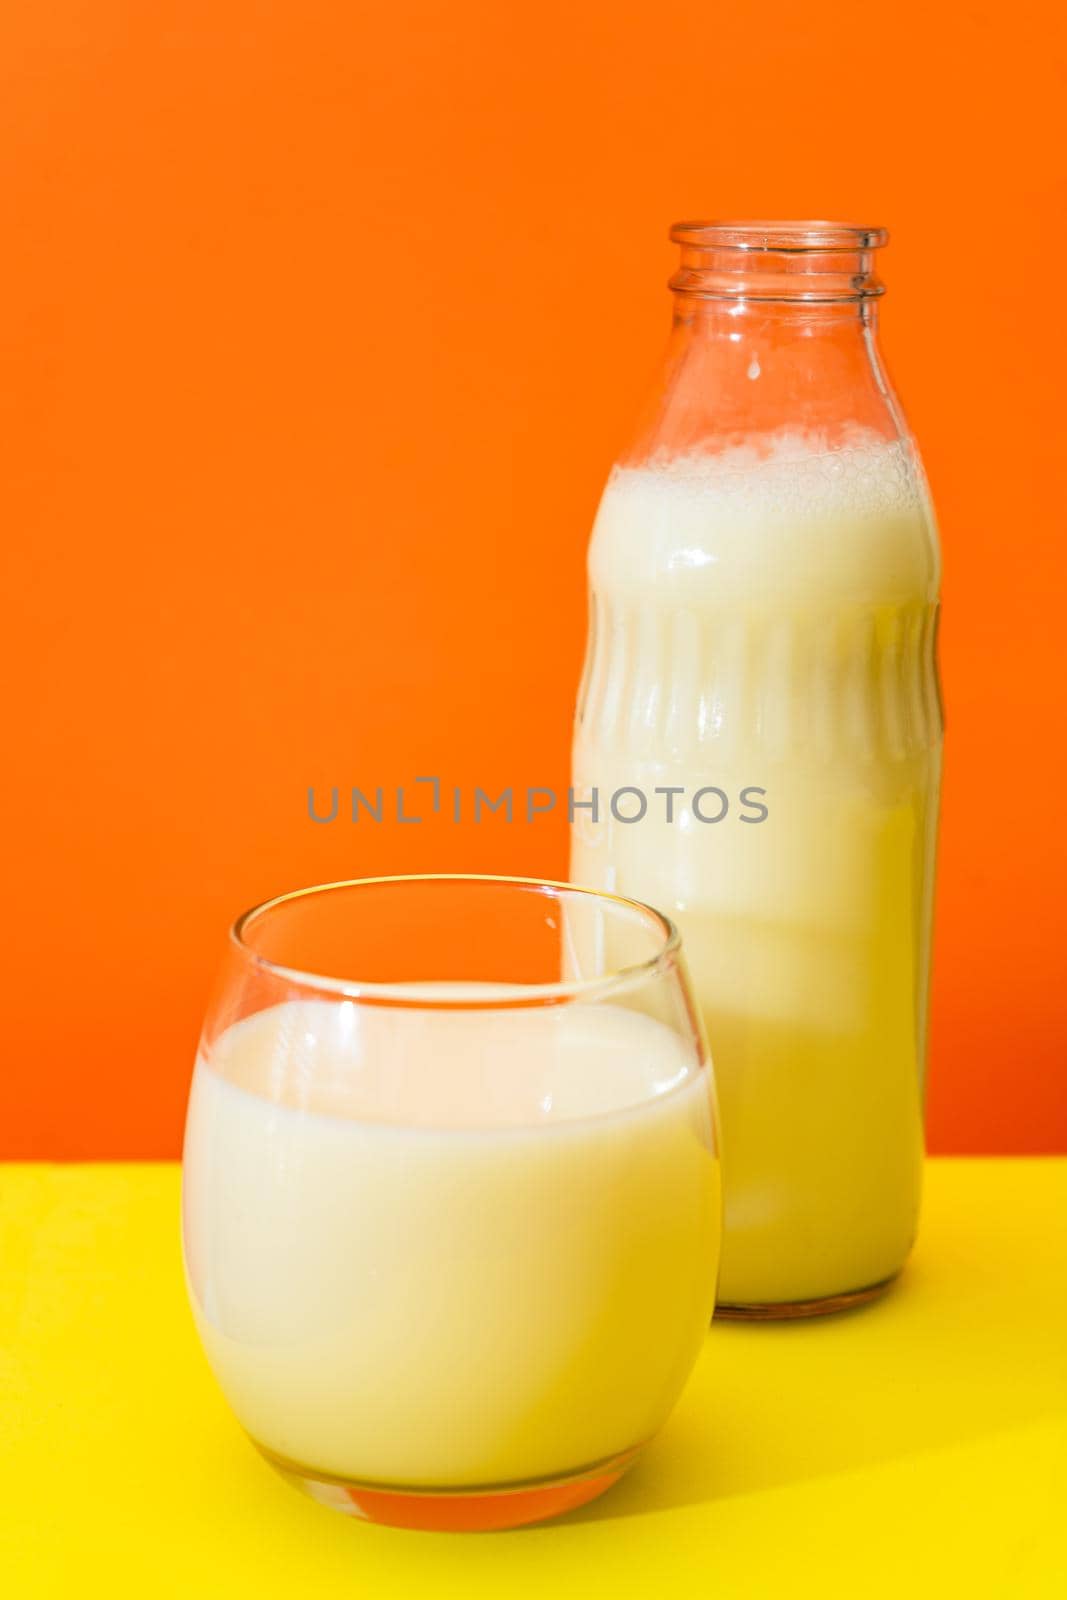 Glass bottle and large glass with milk on a yellow table with orange background. Copy space. vertical orientation